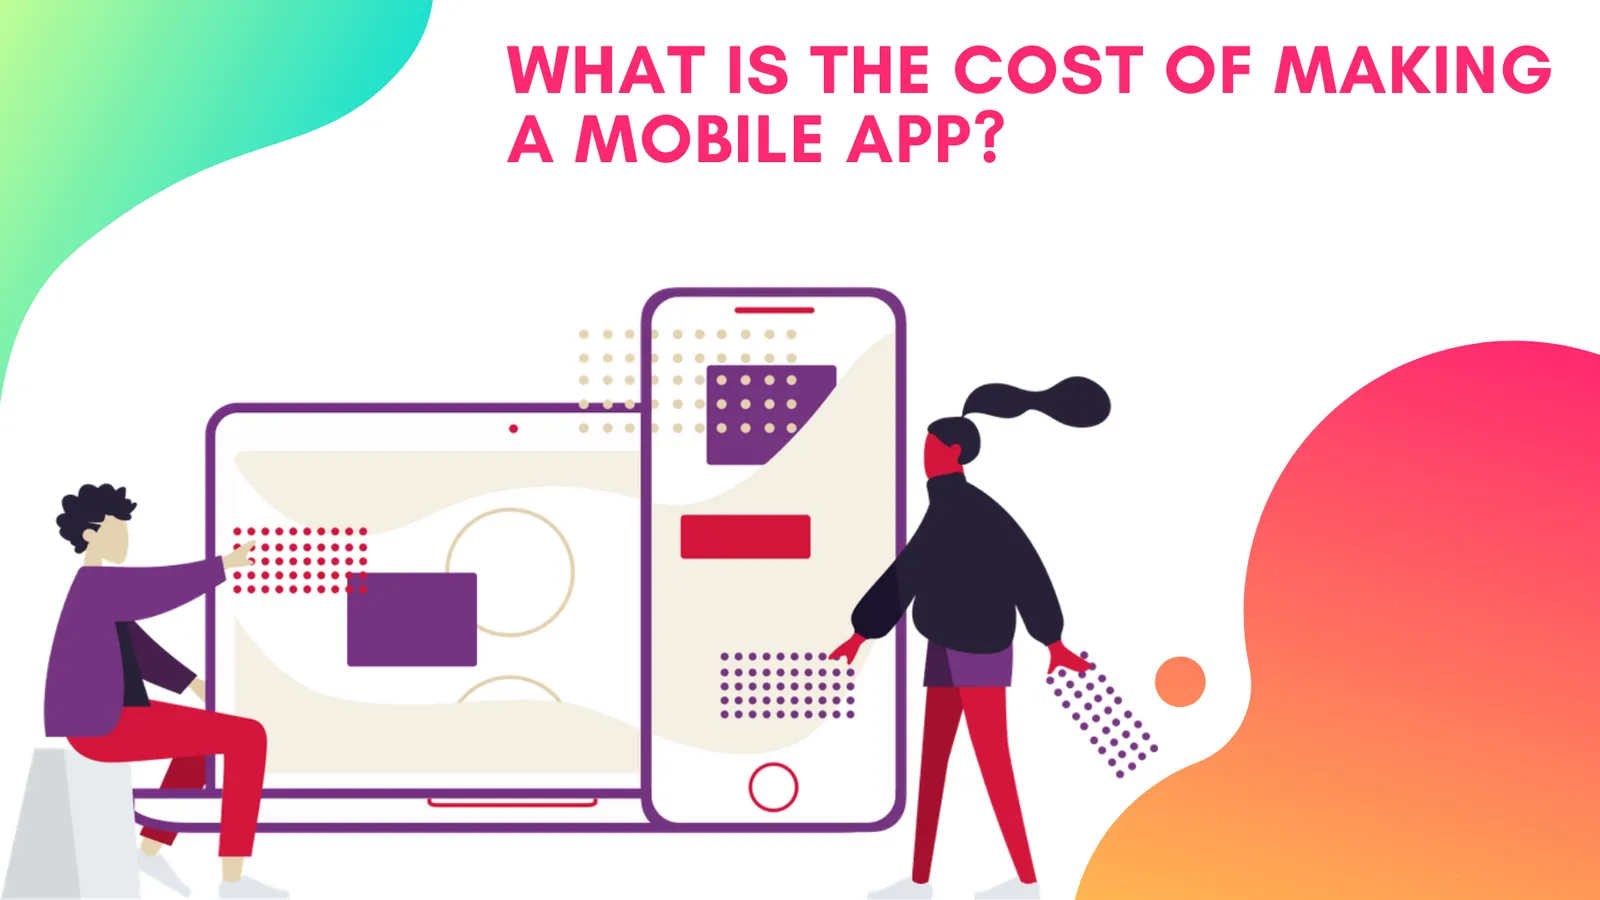 What is the cost of making a mobile app?